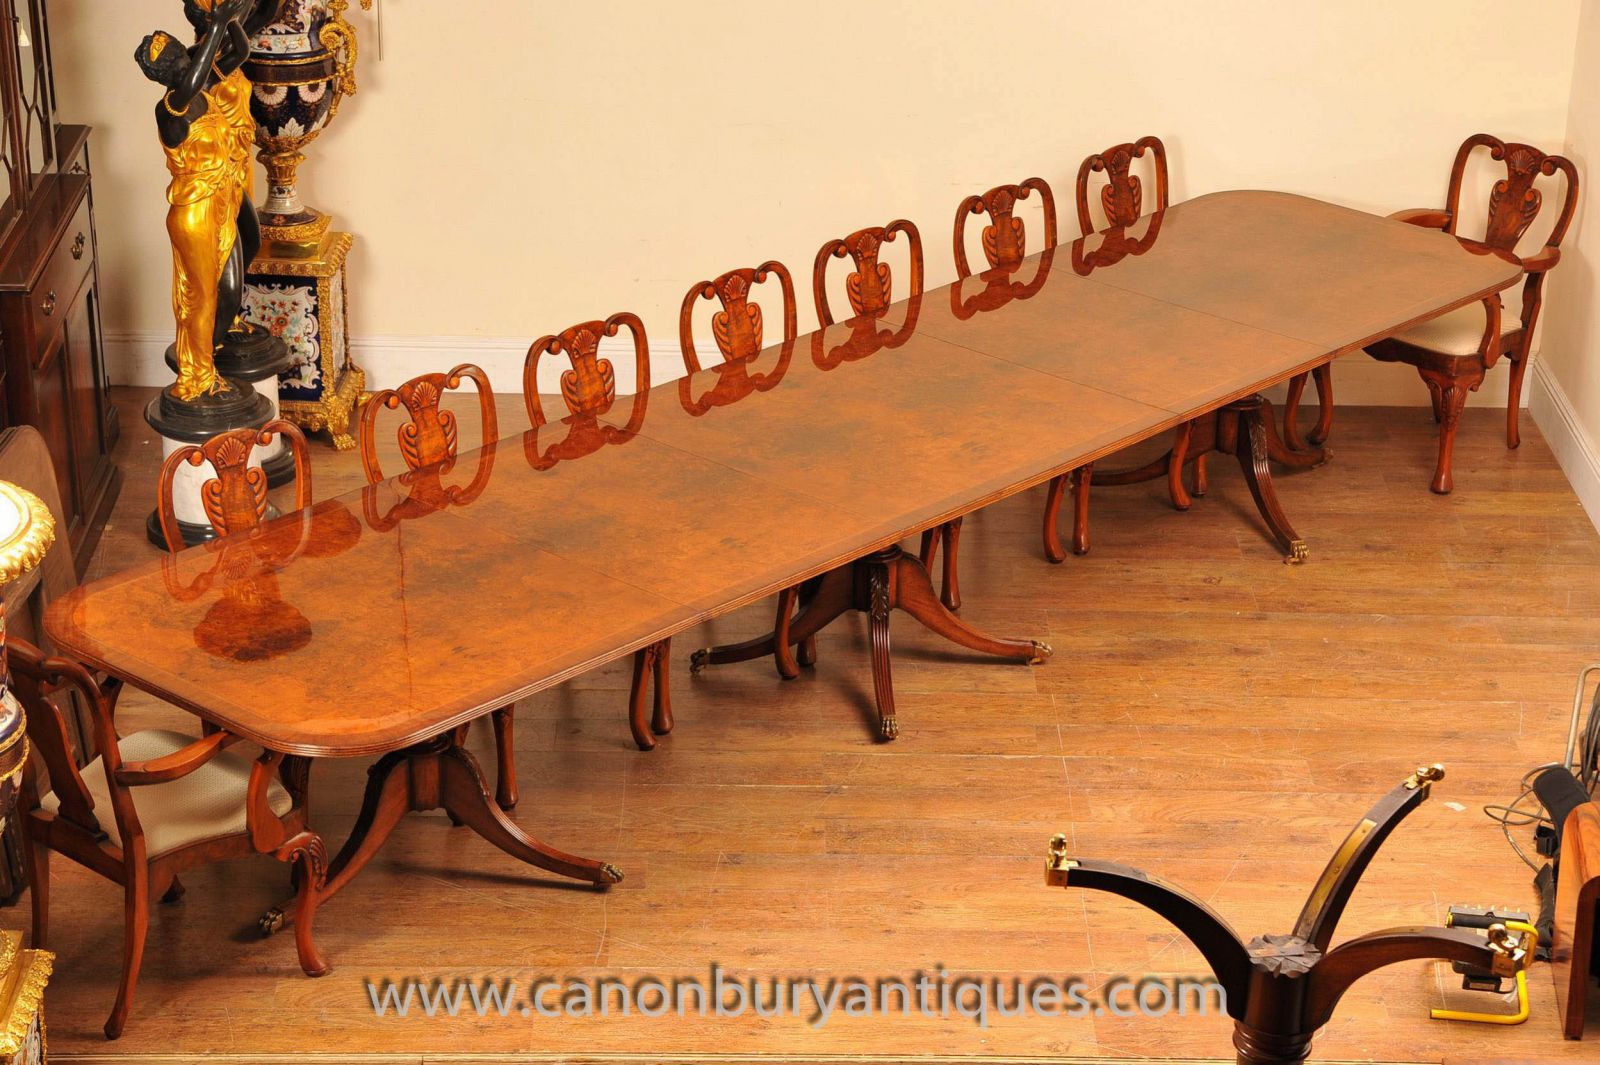 Regency table with Chippendale chairs in walnut